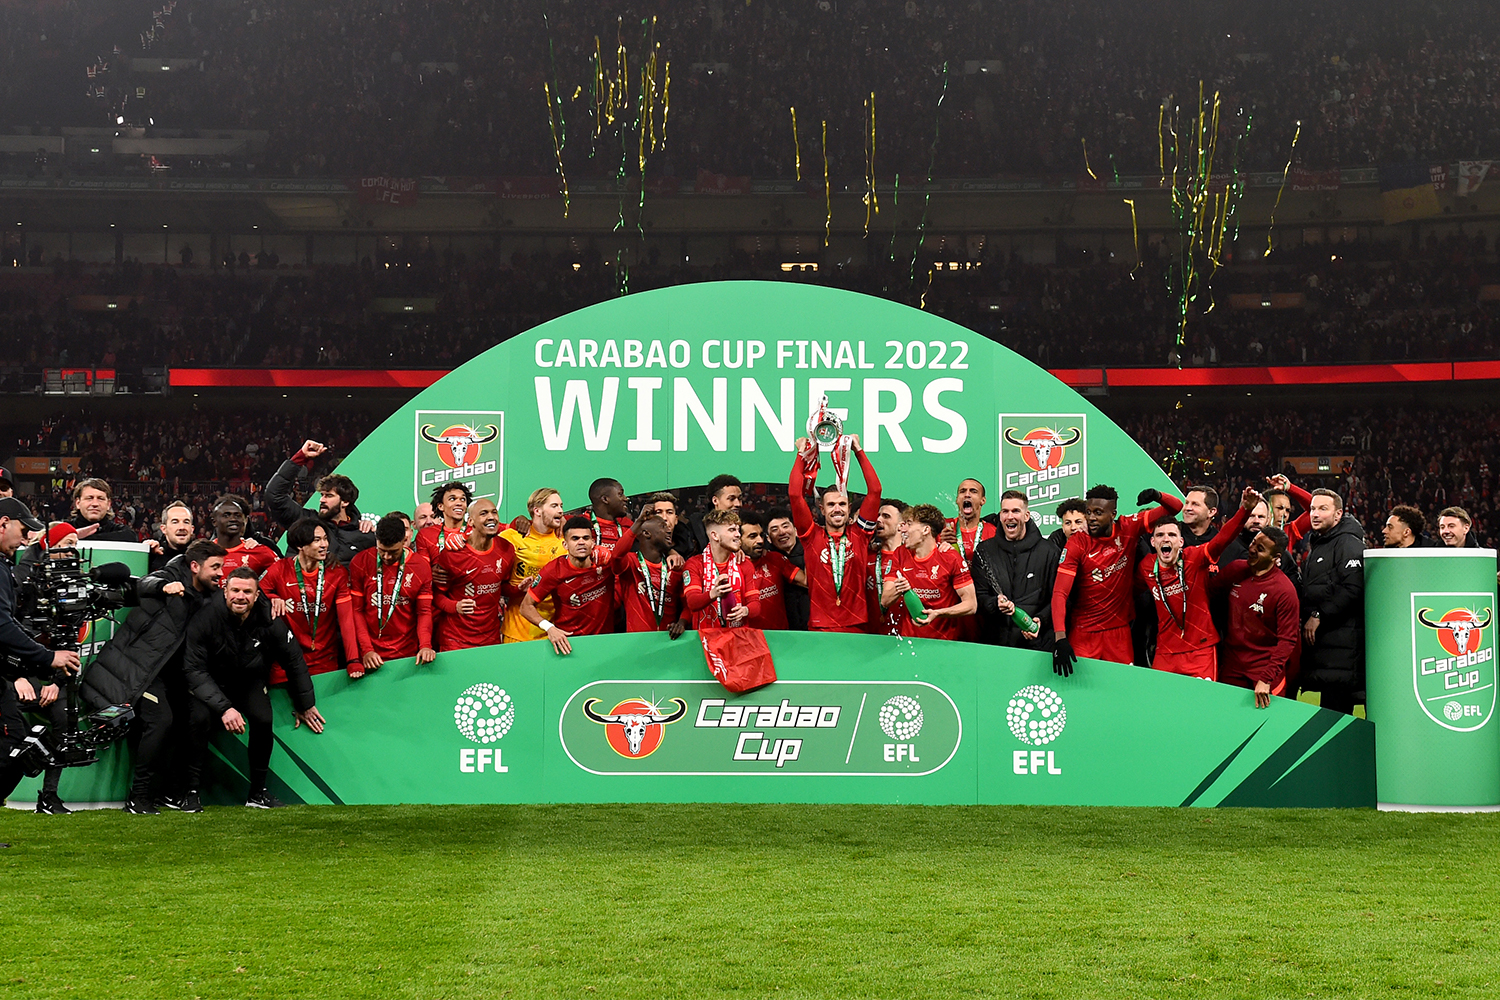 Jordan Henderson captain of Liverpool lifting the EFL Carabao Cup trophy at the end of the Carabao Cup Final match between Chelsea and Liverpool at Wembley Stadium on February 27, 2022 in London, England.